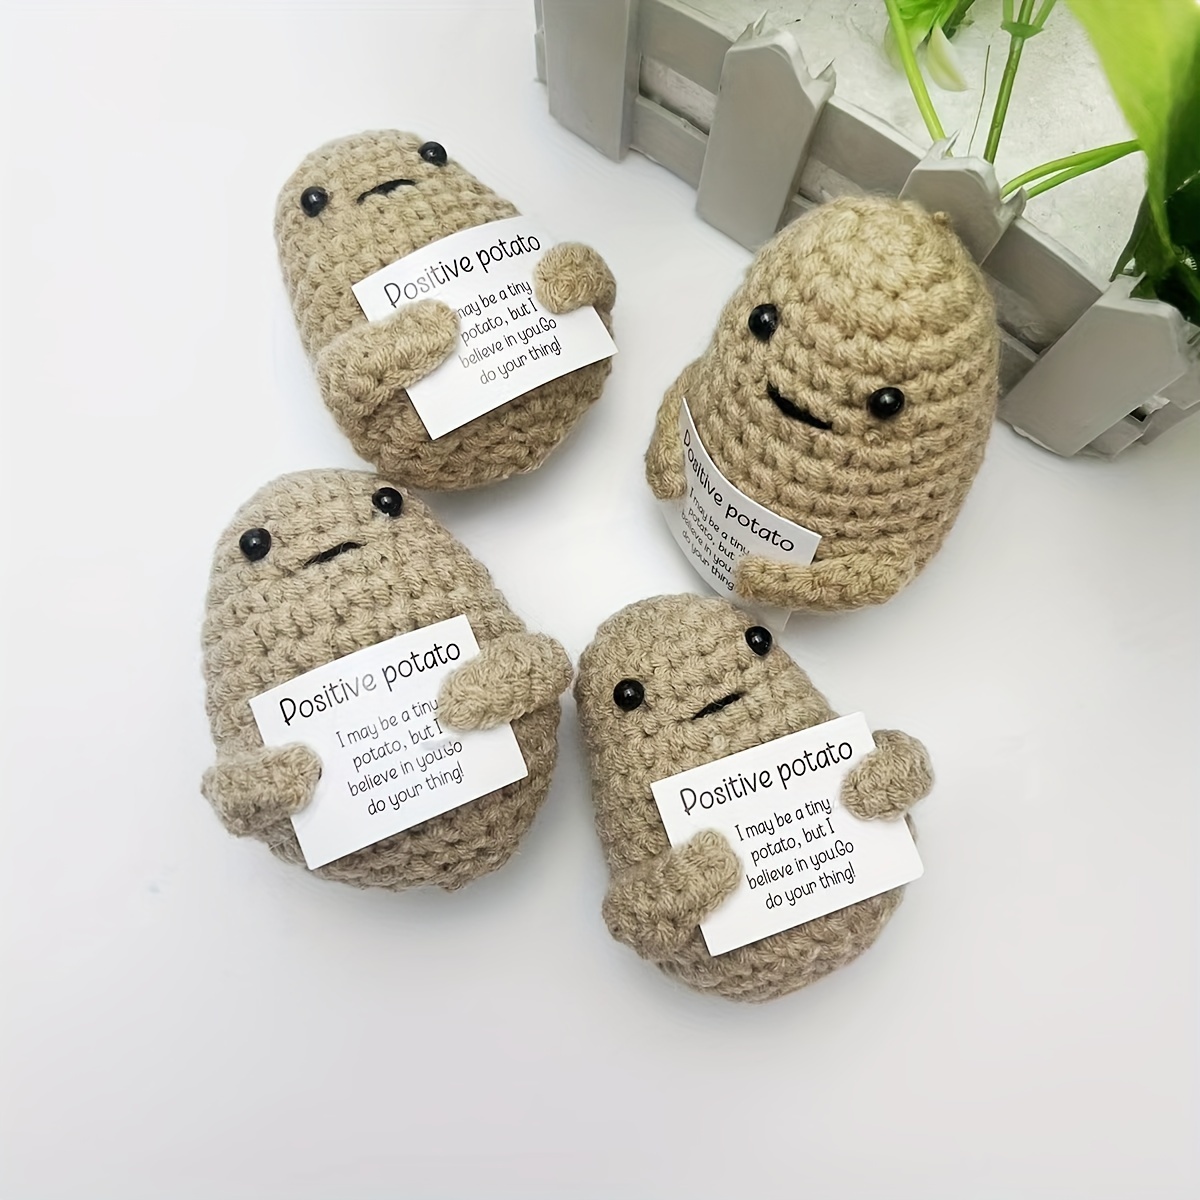 Positive Potato Funny Crochet Gifts with Encouragement Card for Cheer Up,  Cute Things Birthday Gifts for Friends St Patricks Day Decoration